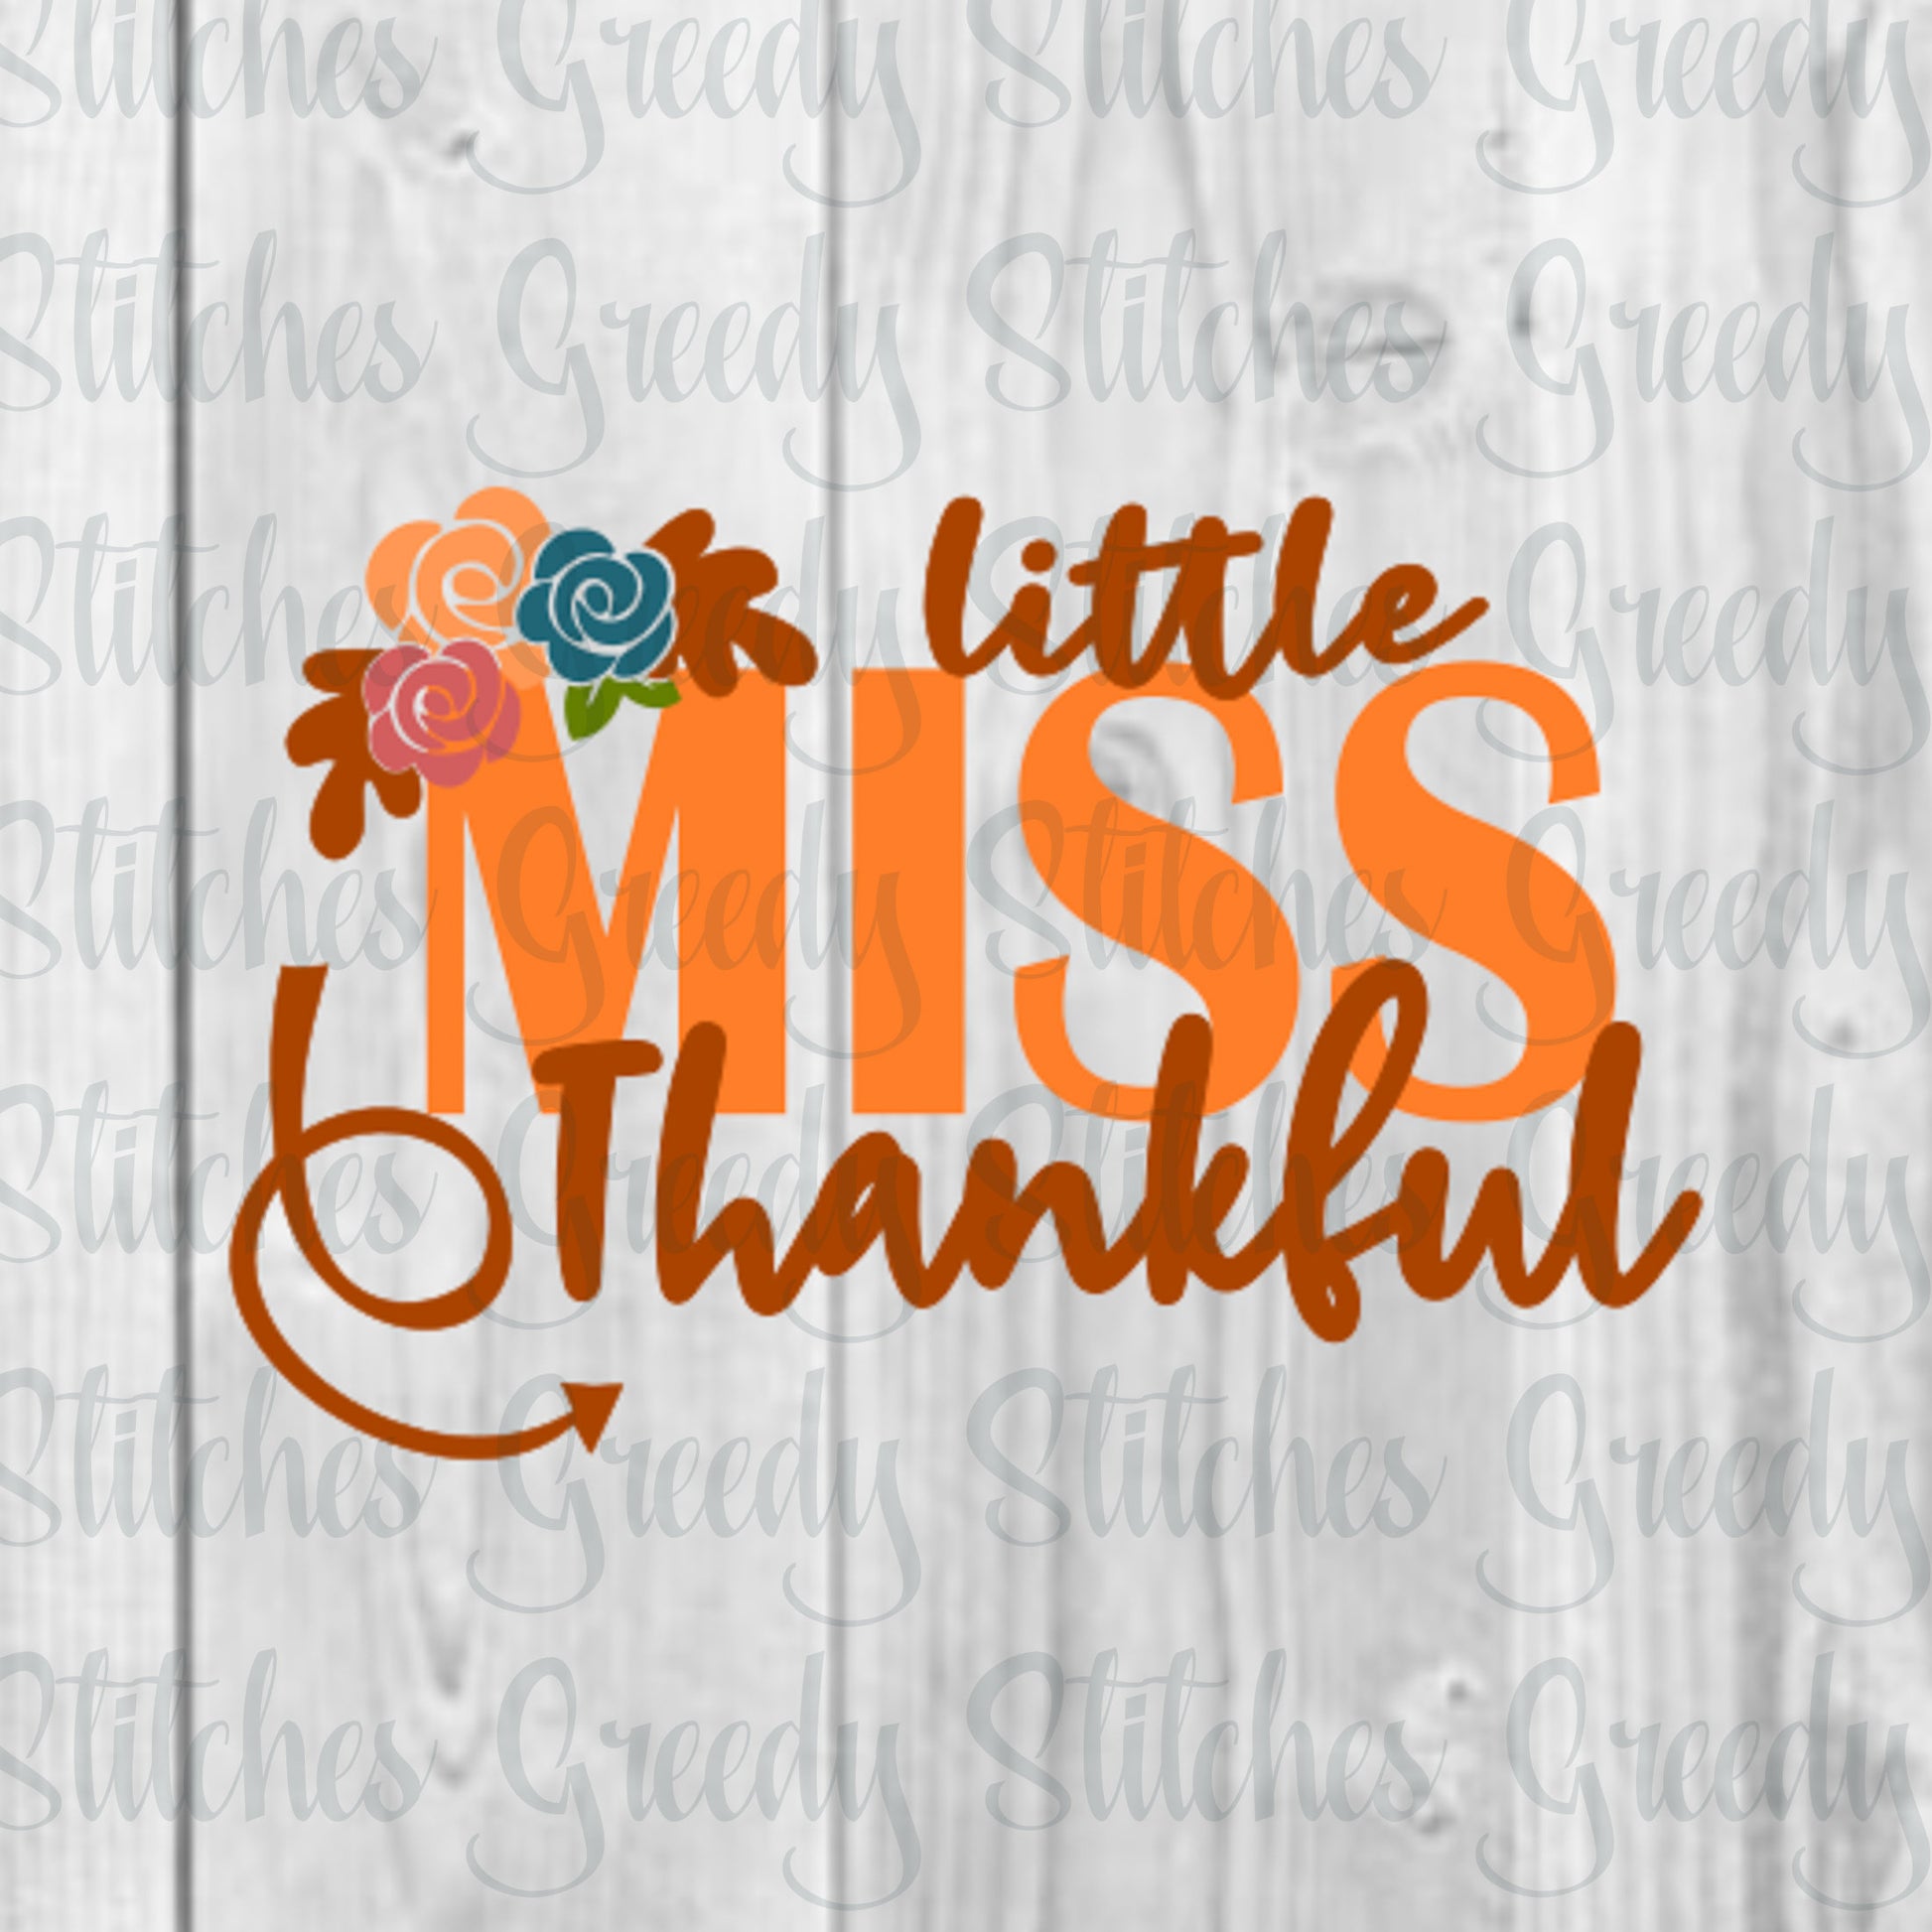 Little Miss Thankful svg, dxf, eps, png. Thanksgiving SvG | Thanksgiving DxF  | Instant Download Cut Files